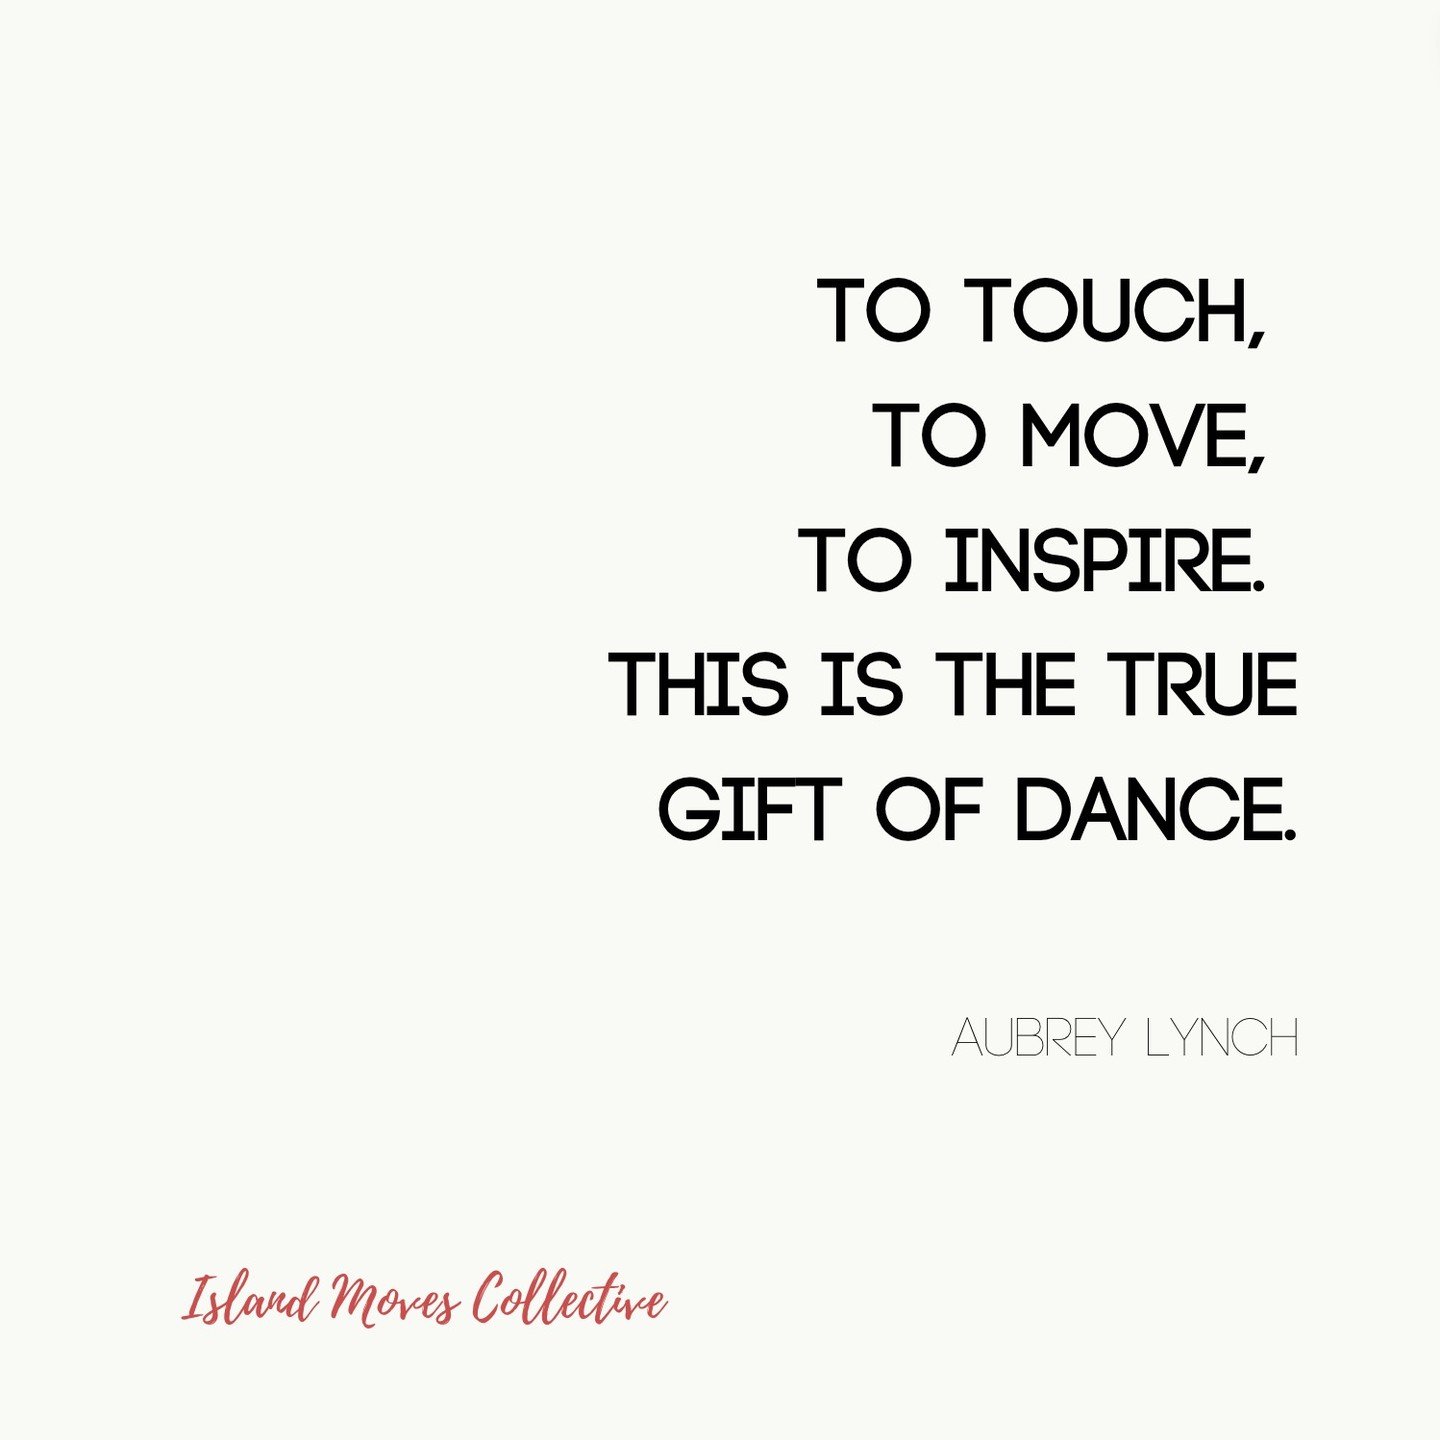 Dive into the world of dance where every movement becomes a touch, a motion, and an inspiration.
#GiftOfDance #Inspiration #DanceMagic #niatechnique